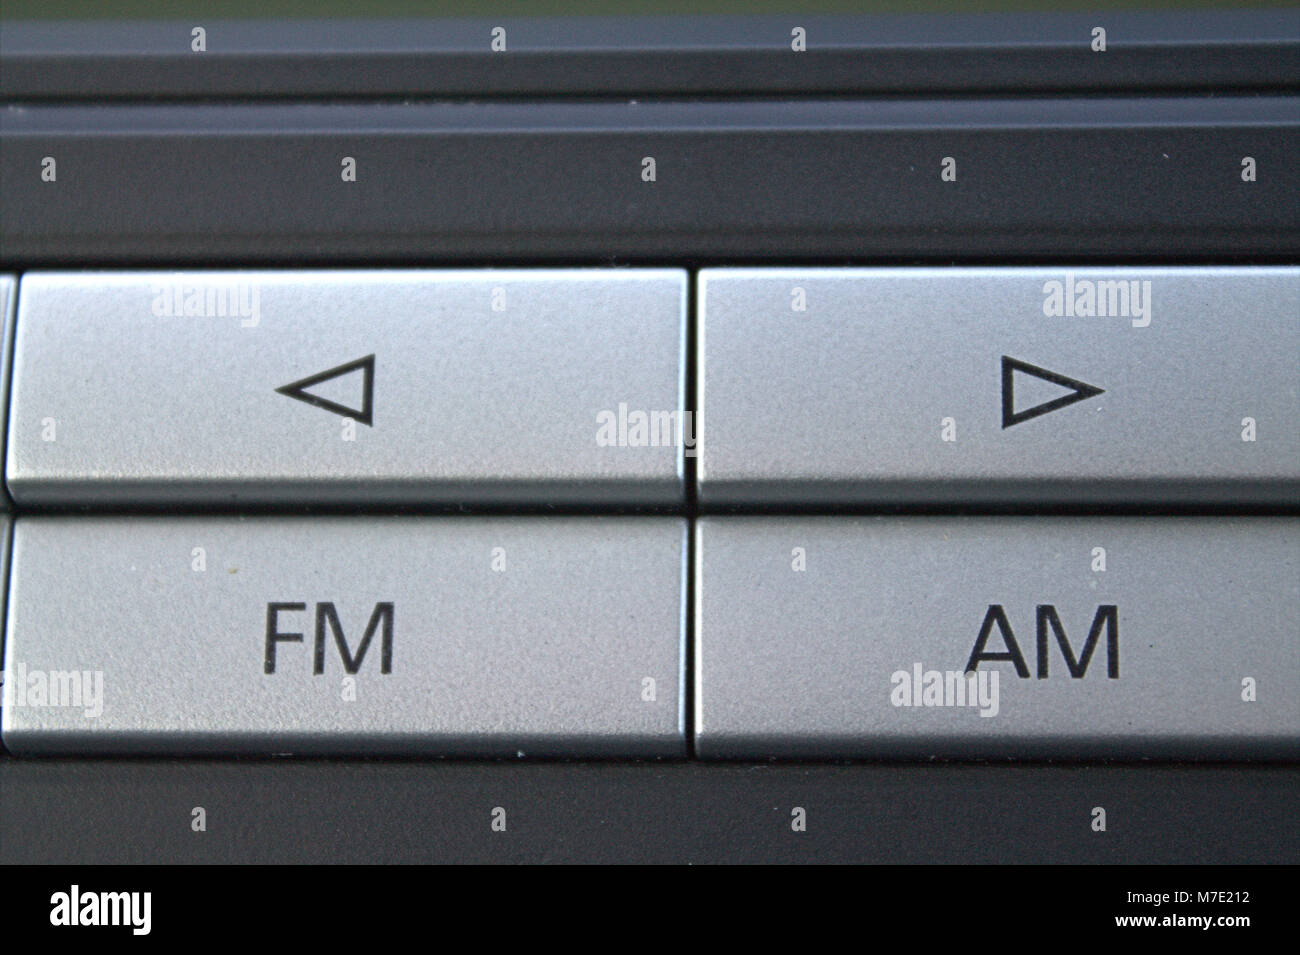 Close up of in car entertainment system showing Fm and AM selections Stock Photo